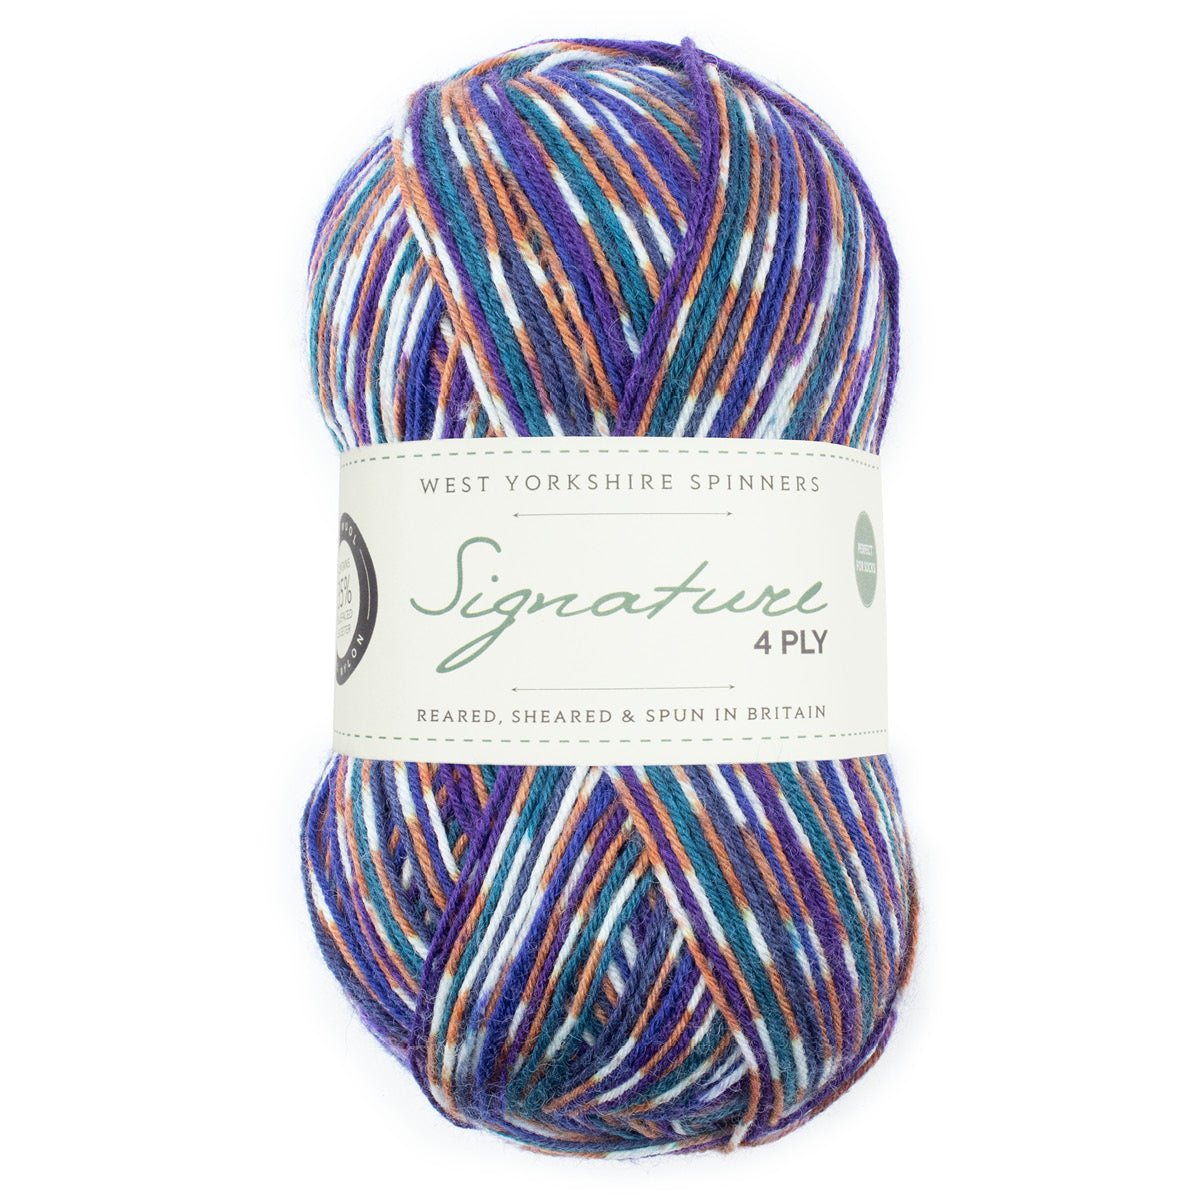 SIGNATURE 4PLY - COUNTRY BIRDS 1169-Starling - West Yorkshire Spinners